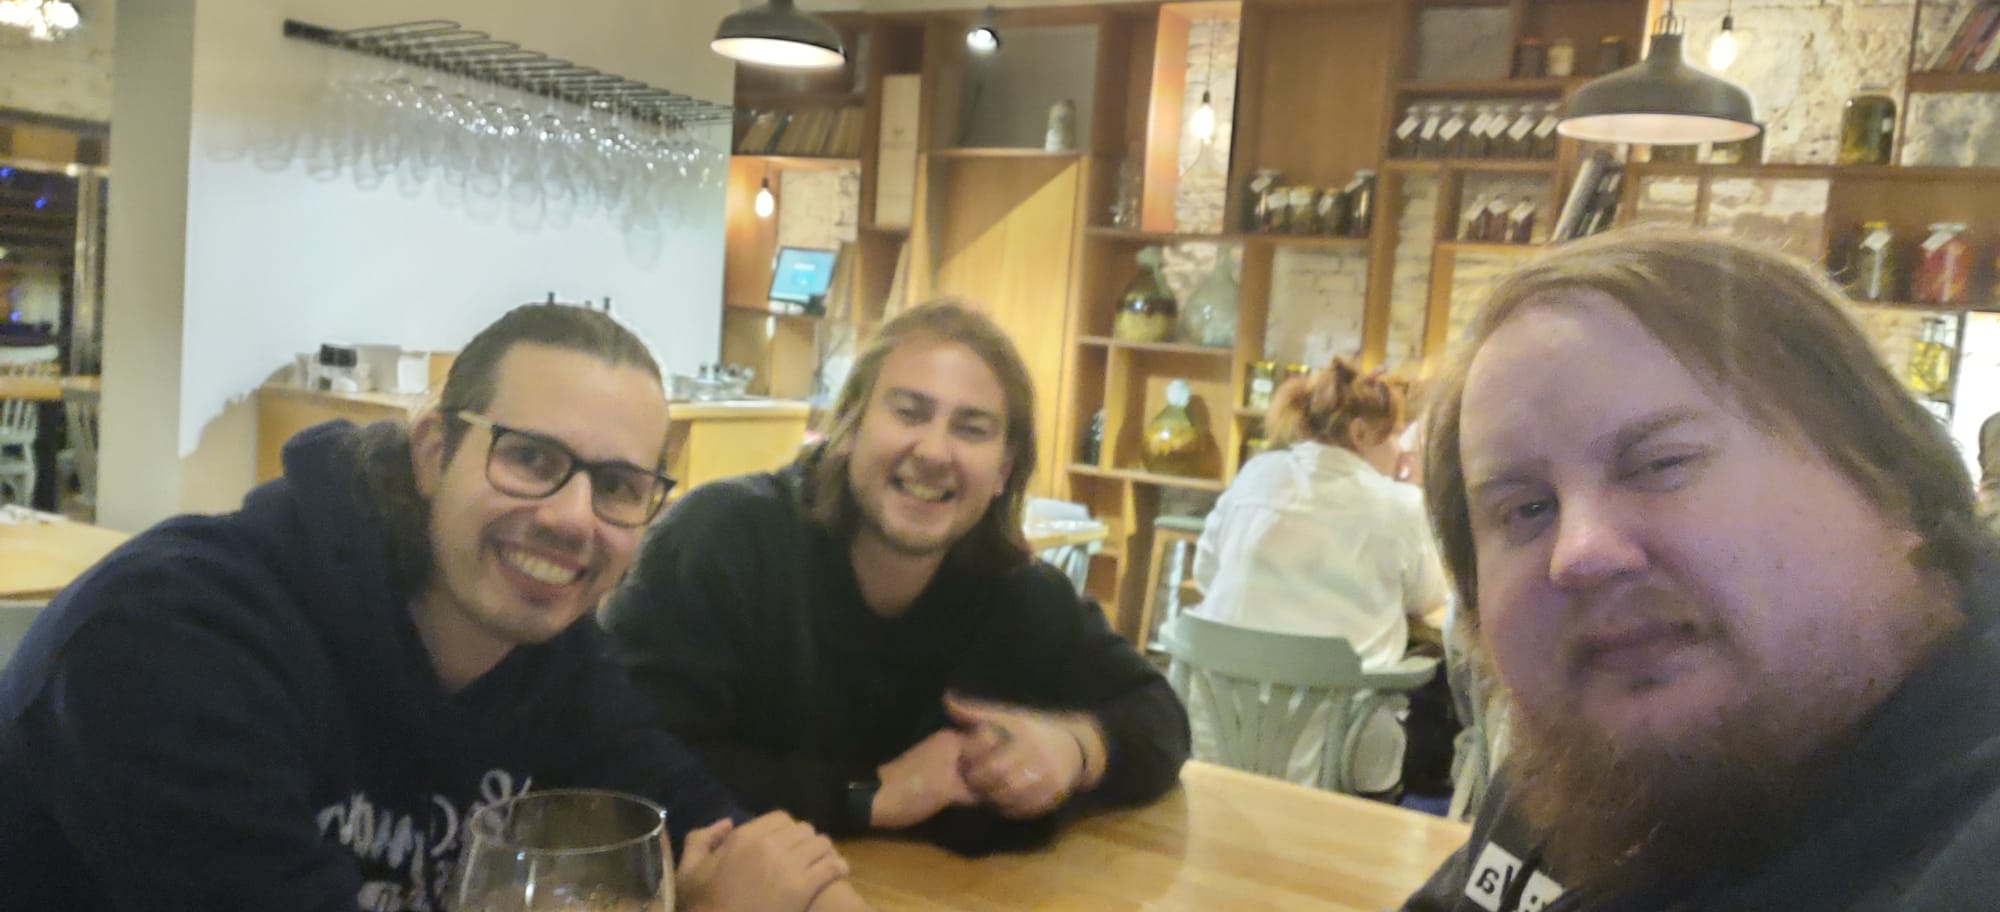 Three men sitting in a restaurant, taking a group selfie and smiling